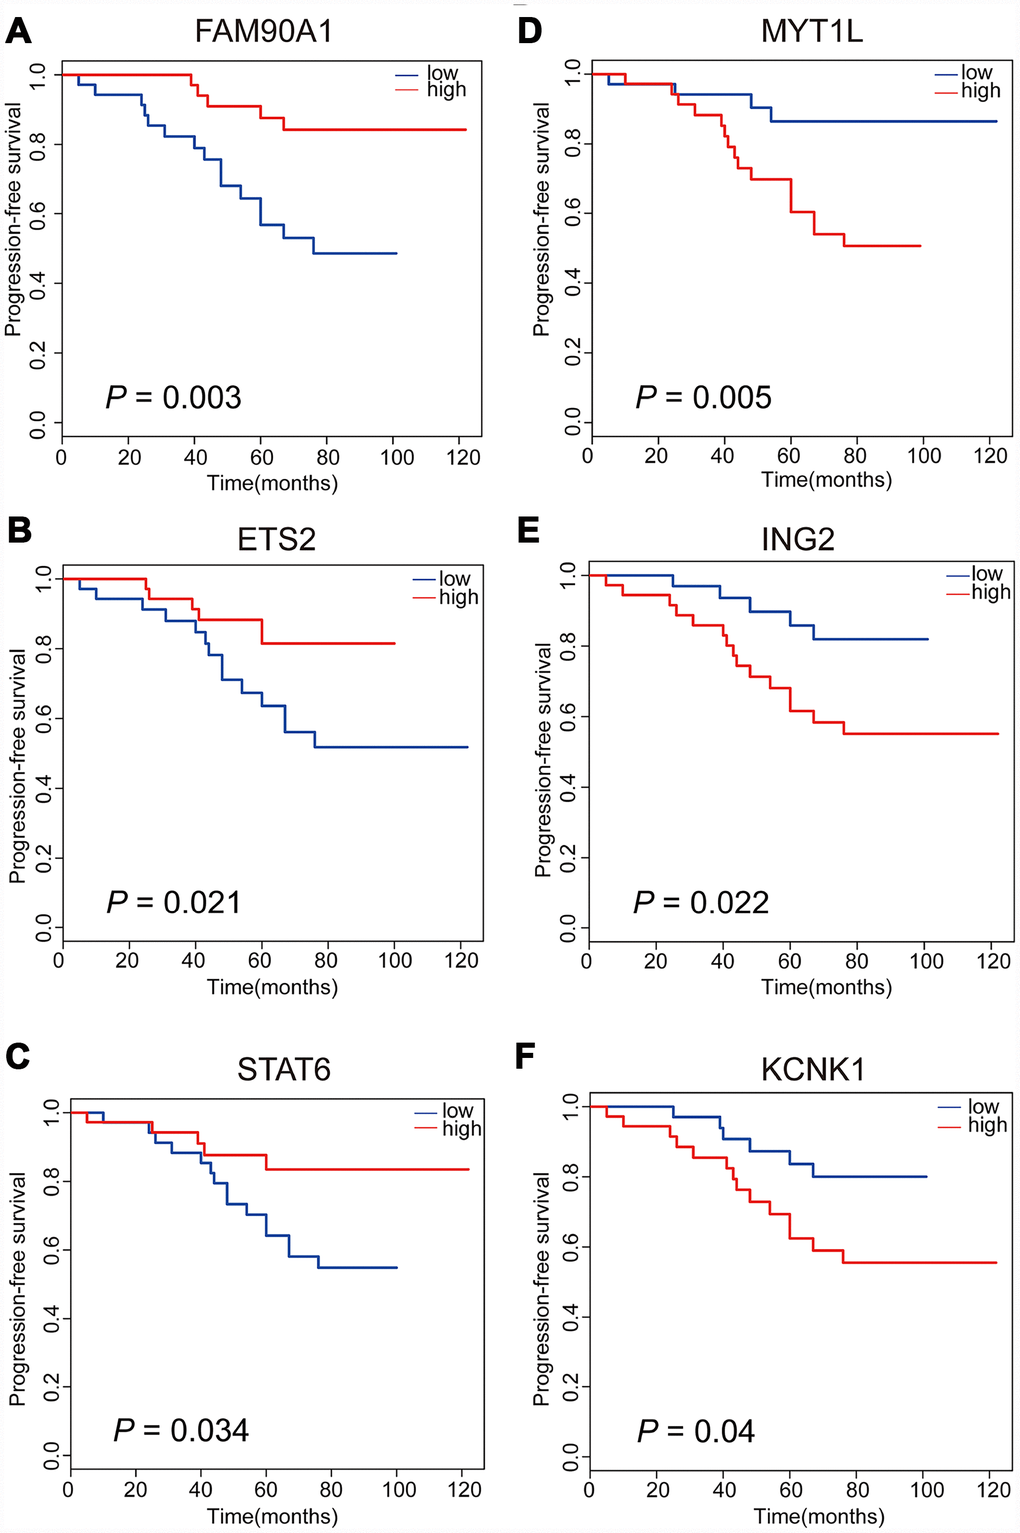 Kaplan-Meier analyses of six significant genes in patients with NFPA. Patients with upregulation of FAM90A1, ETS2 and STAT6 are less likely to have tumour regrowth (A–C). Patients with downregulation of MYT1L, ING2 and KCNK1 are less likely to have tumour regrowth (D–F).